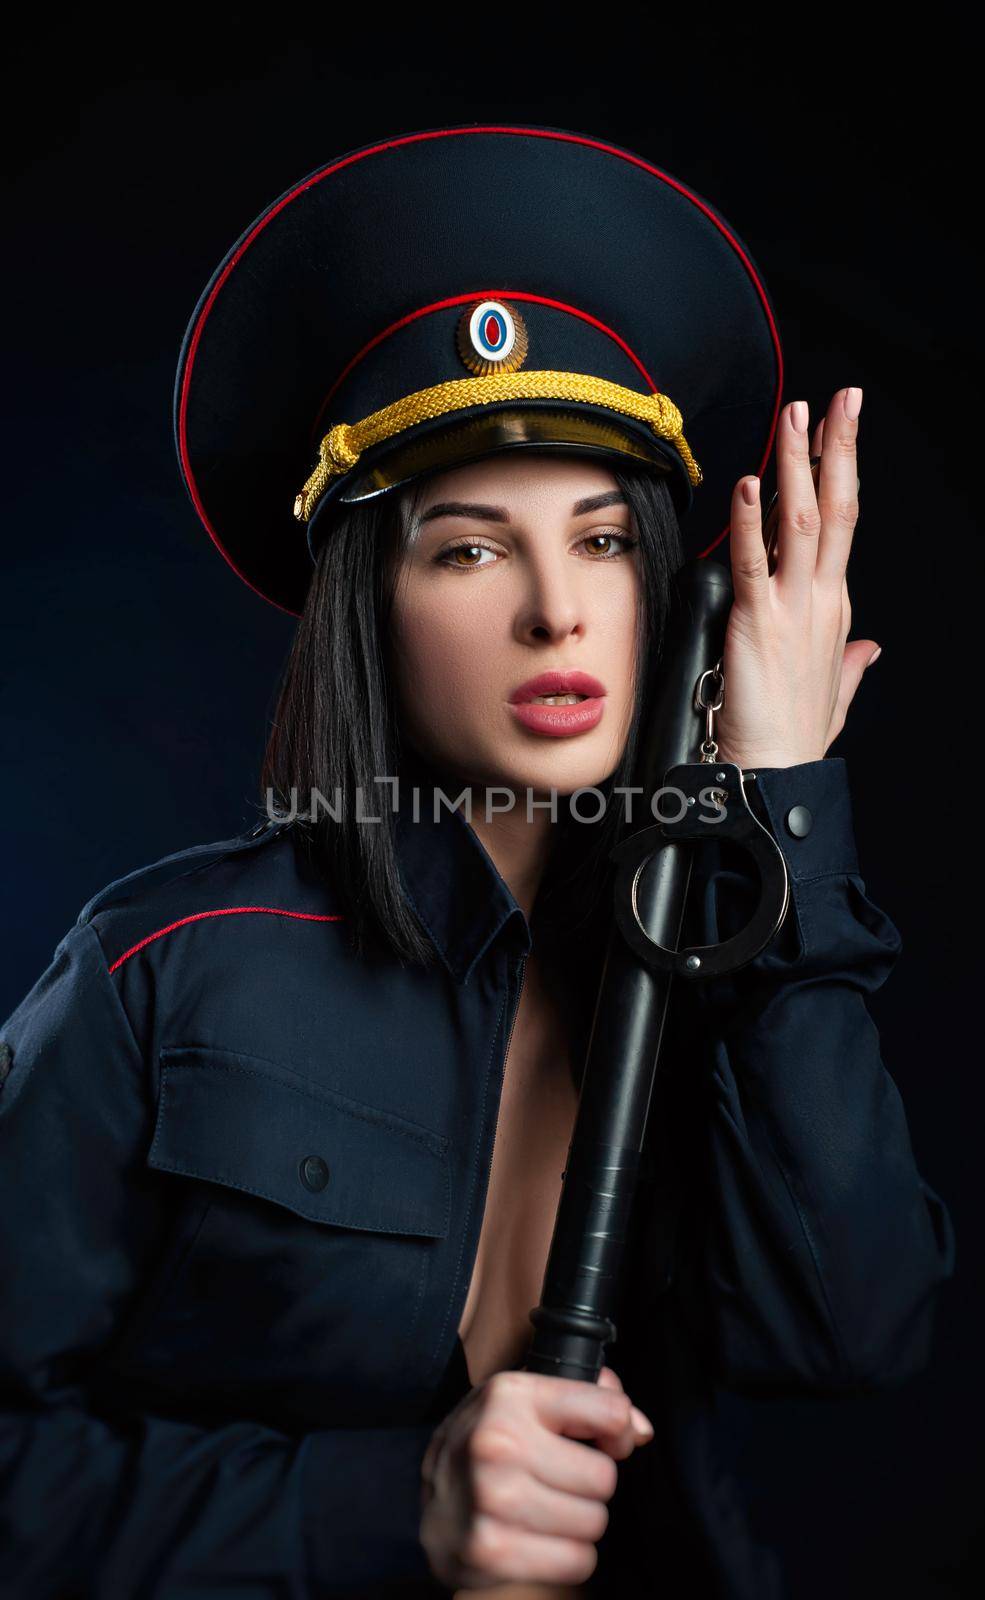 the Portrait of a woman in a Russian police uniform English translation police